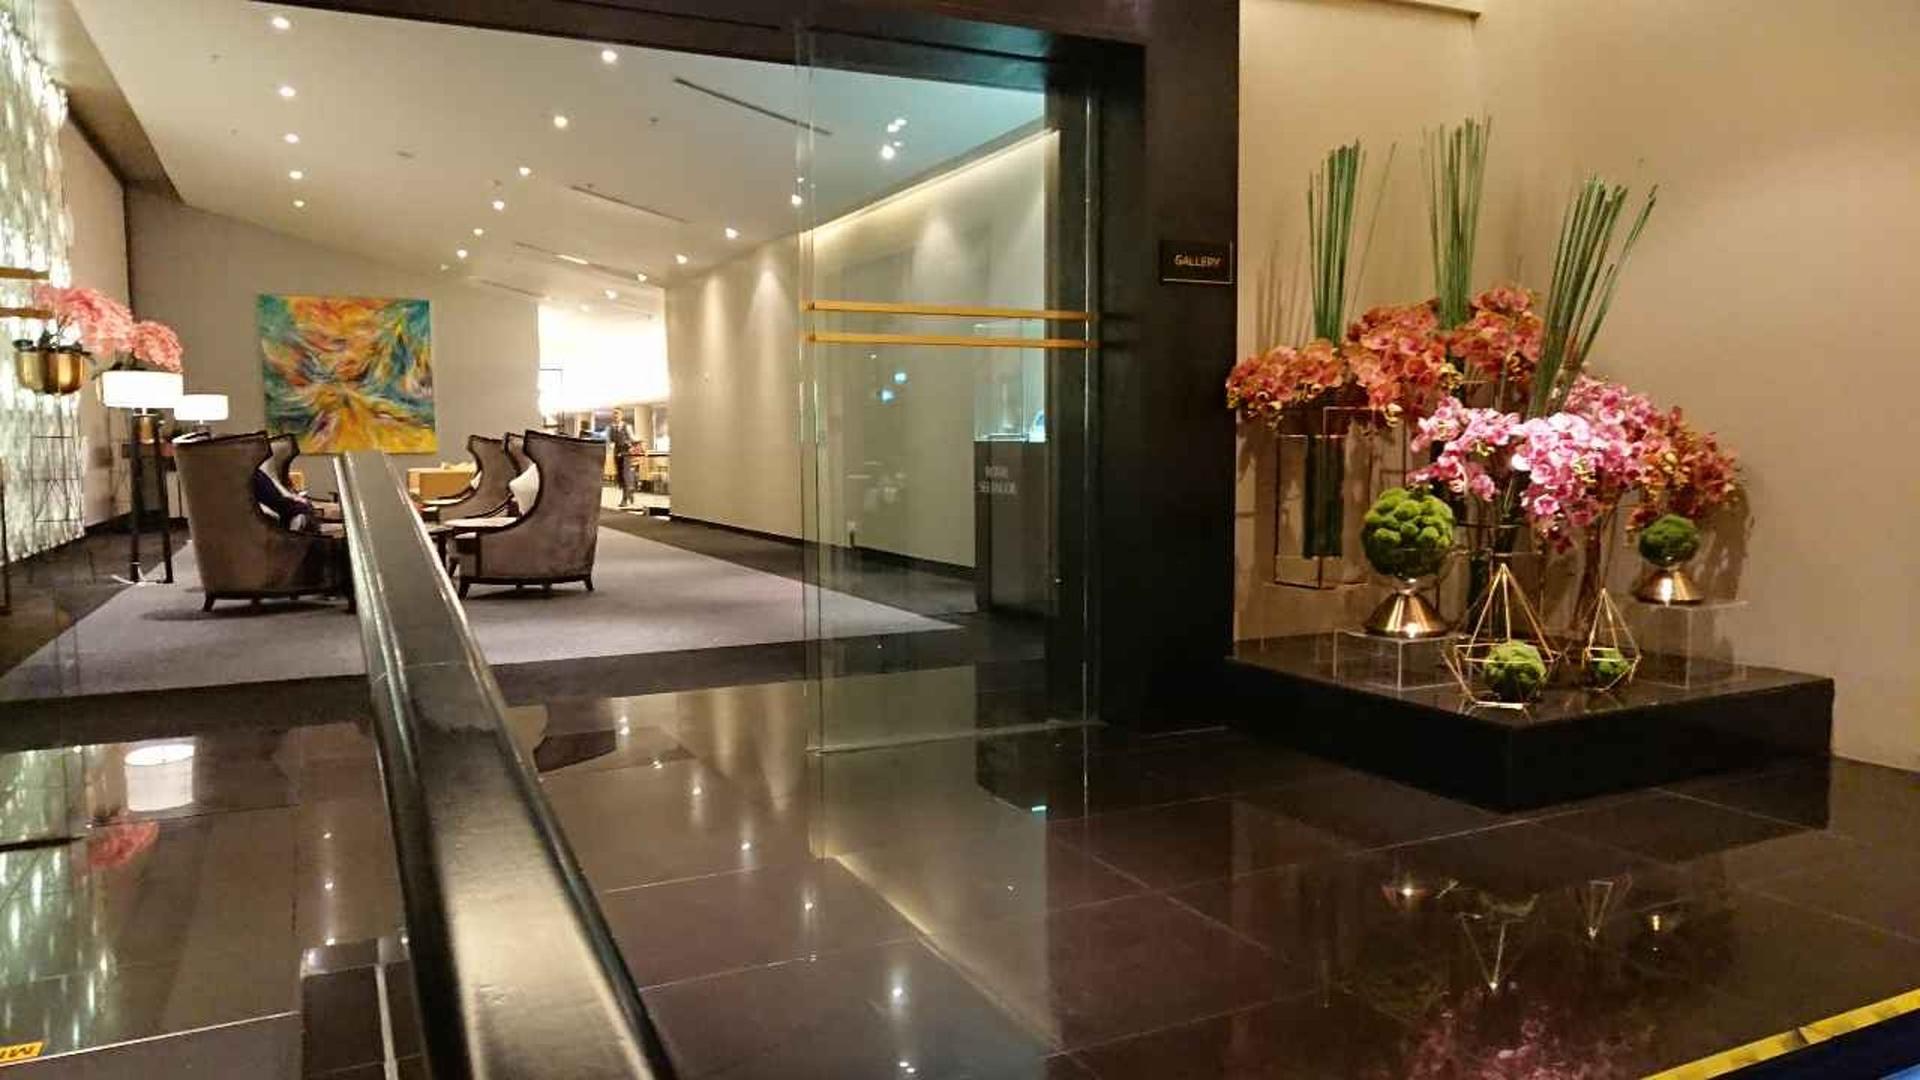 Malaysia Airlines Platinum Lounge image 18 of 26